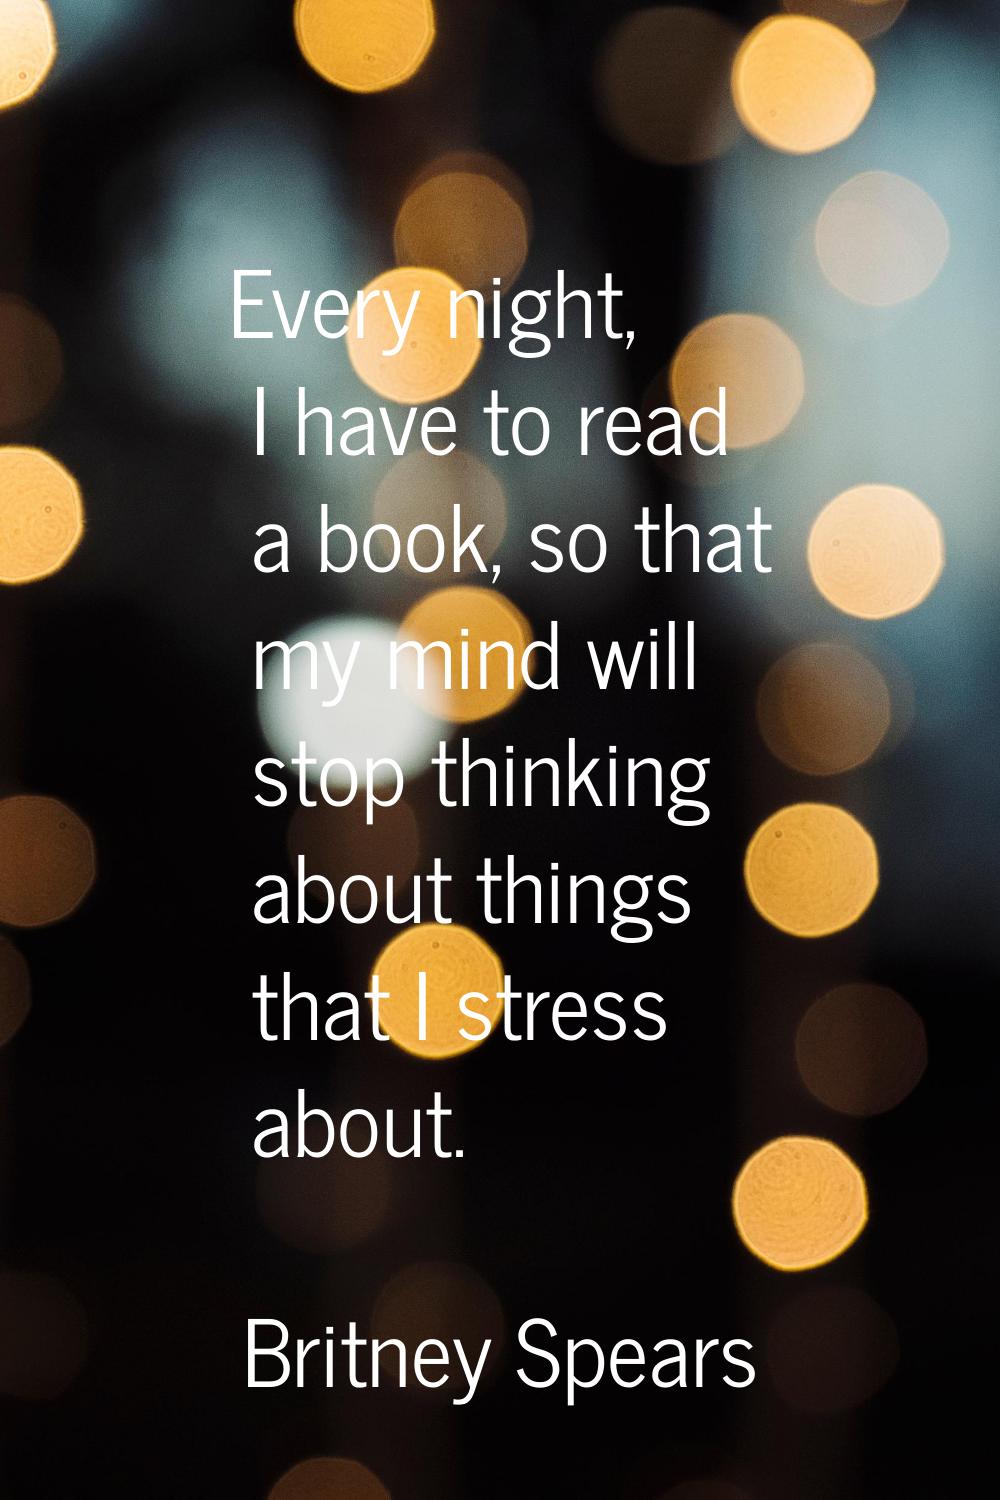 Every night, I have to read a book, so that my mind will stop thinking about things that I stress a